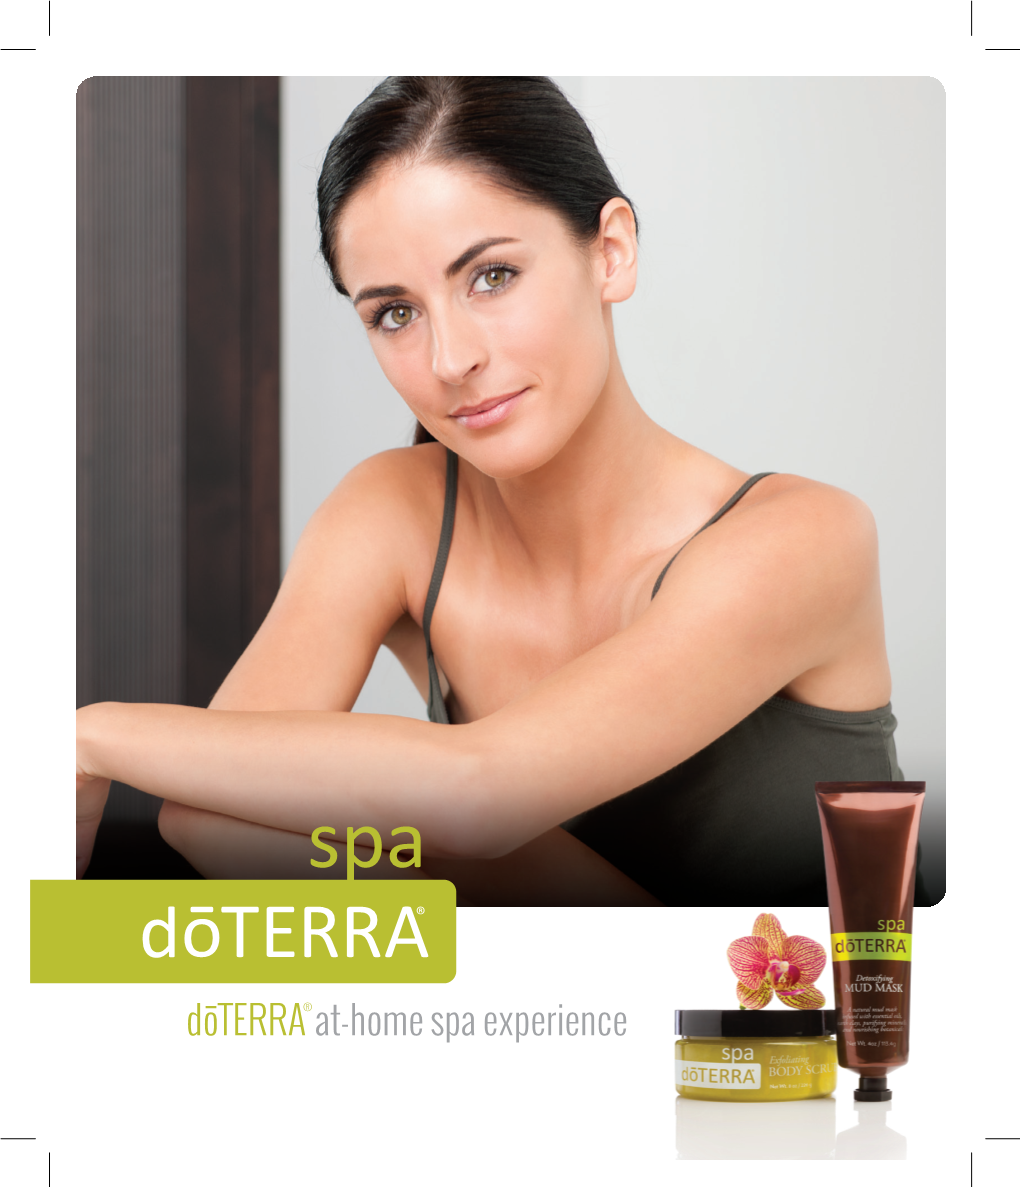 Do–TERRA® At-Home Spa Experience Do-TERRA® SPA Is a Line of CPTG® Essential Oil–Infused Products That Provide an Aromatic and Pampering At-Home Spa Experience